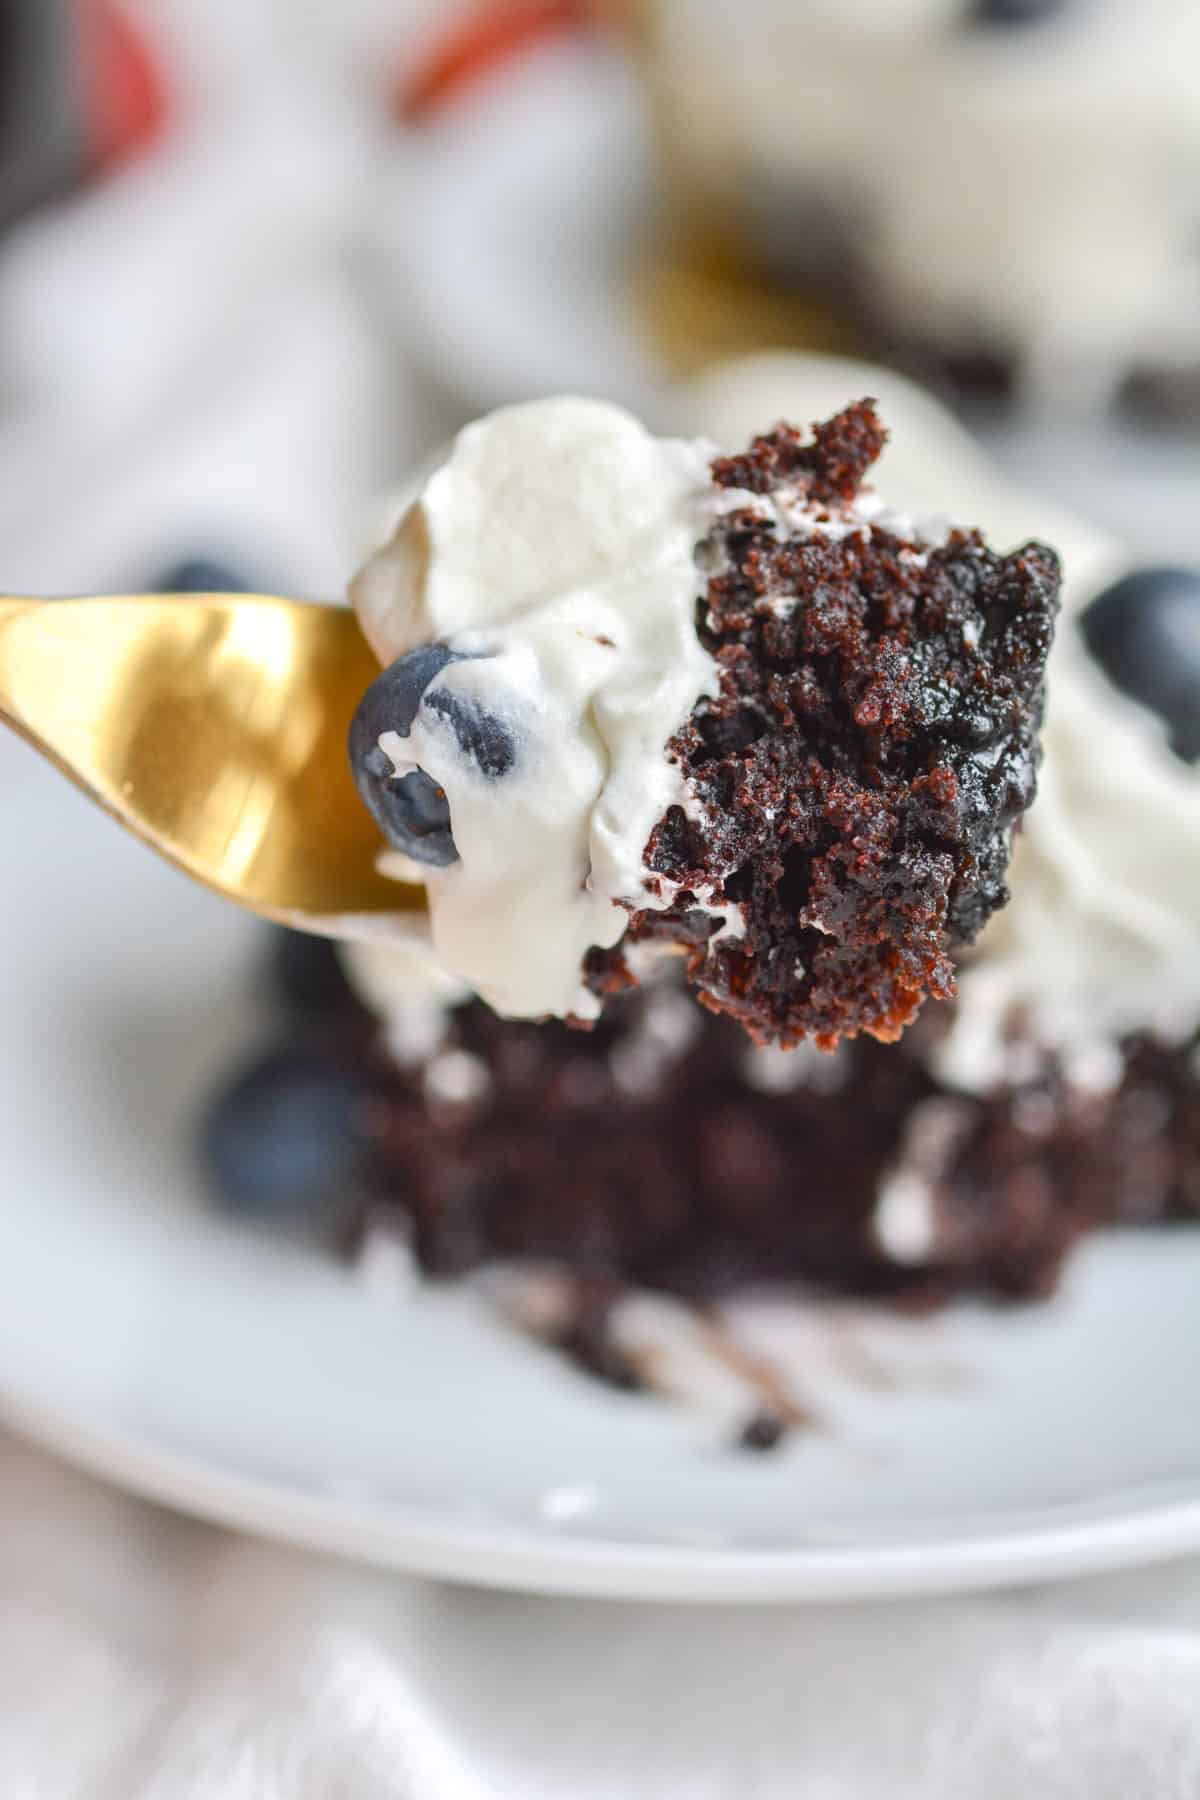 a bite of vegan chocolate blueberry cake on a gold fork